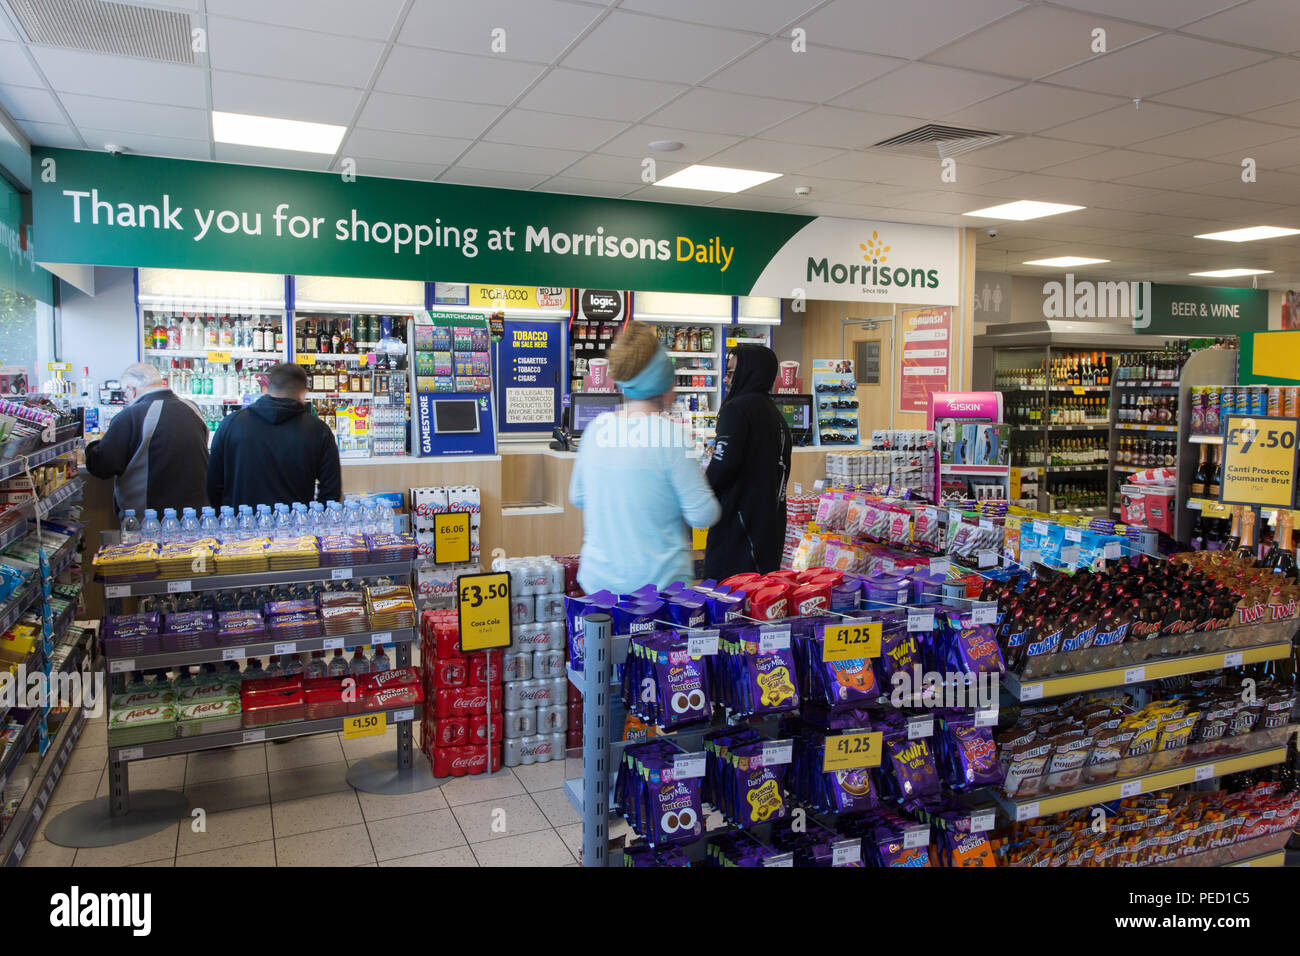 Morrisons Daily supermercato, Dudley Port, West Midlands Foto Stock